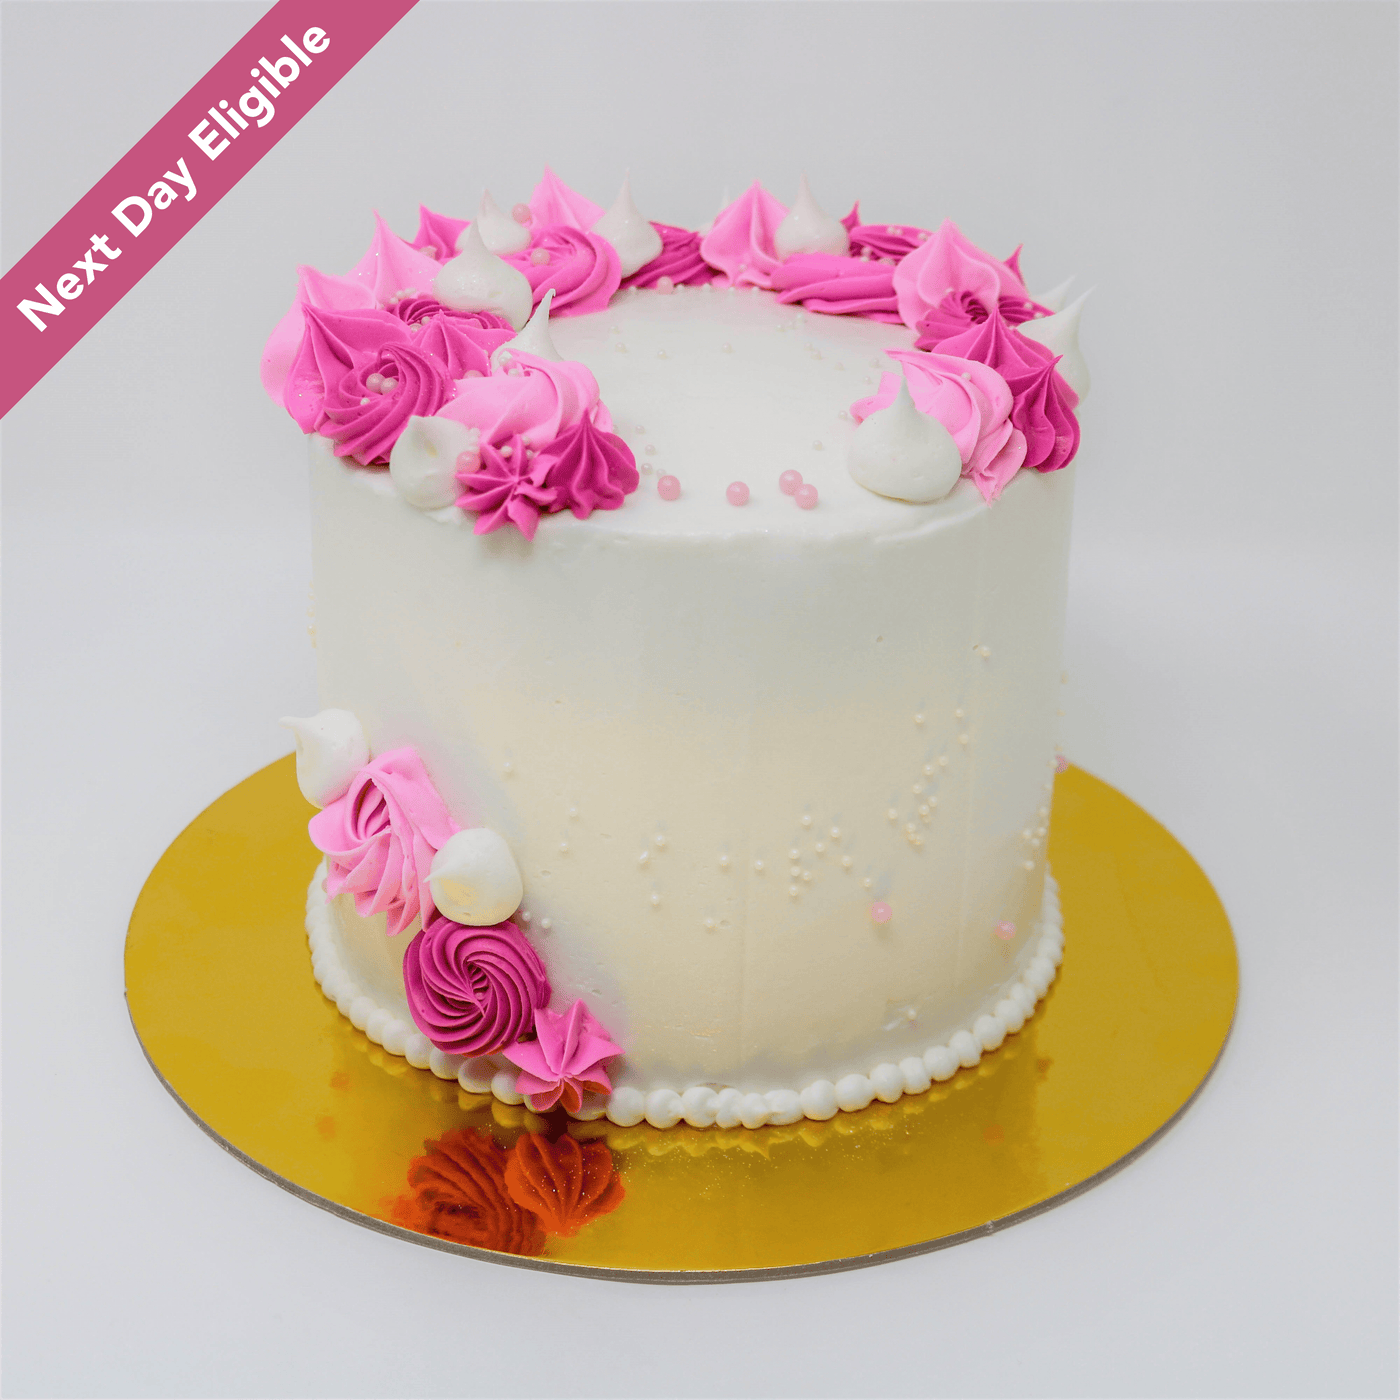 Cakes for women | All Shapes & Slices Cake Co | England